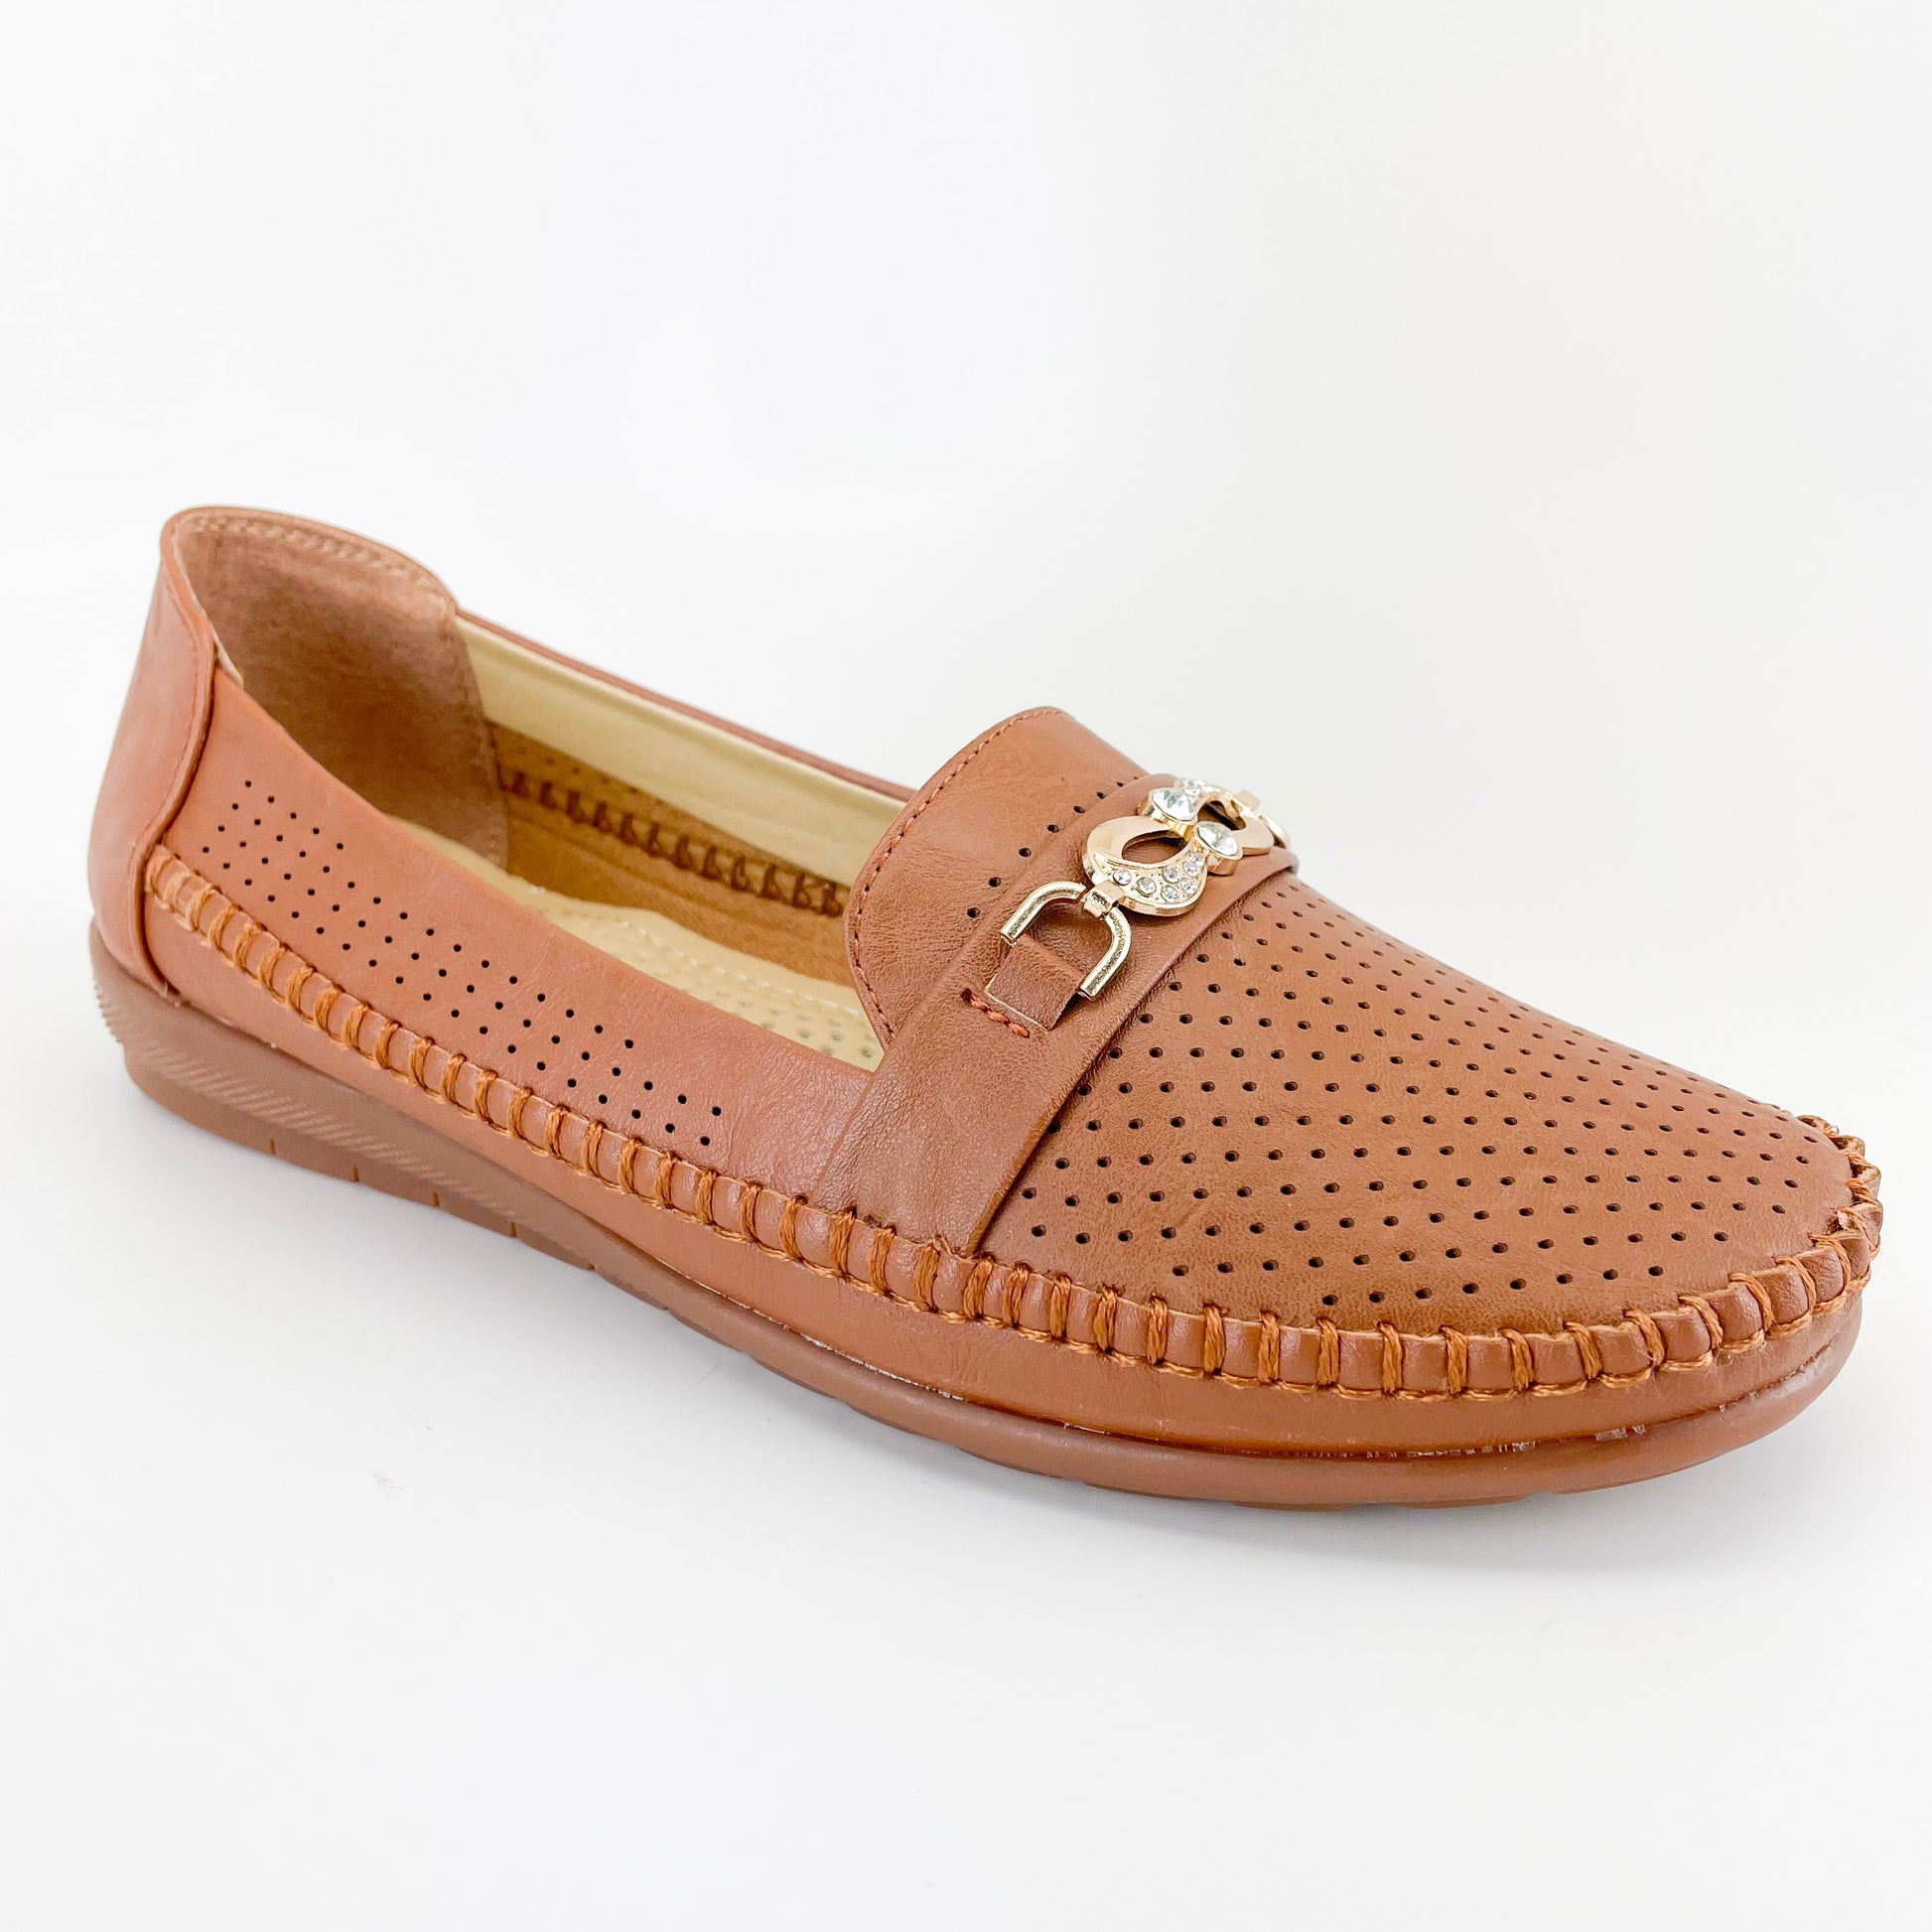 lucita comfort f8-670 camel loafers for women with padded insole